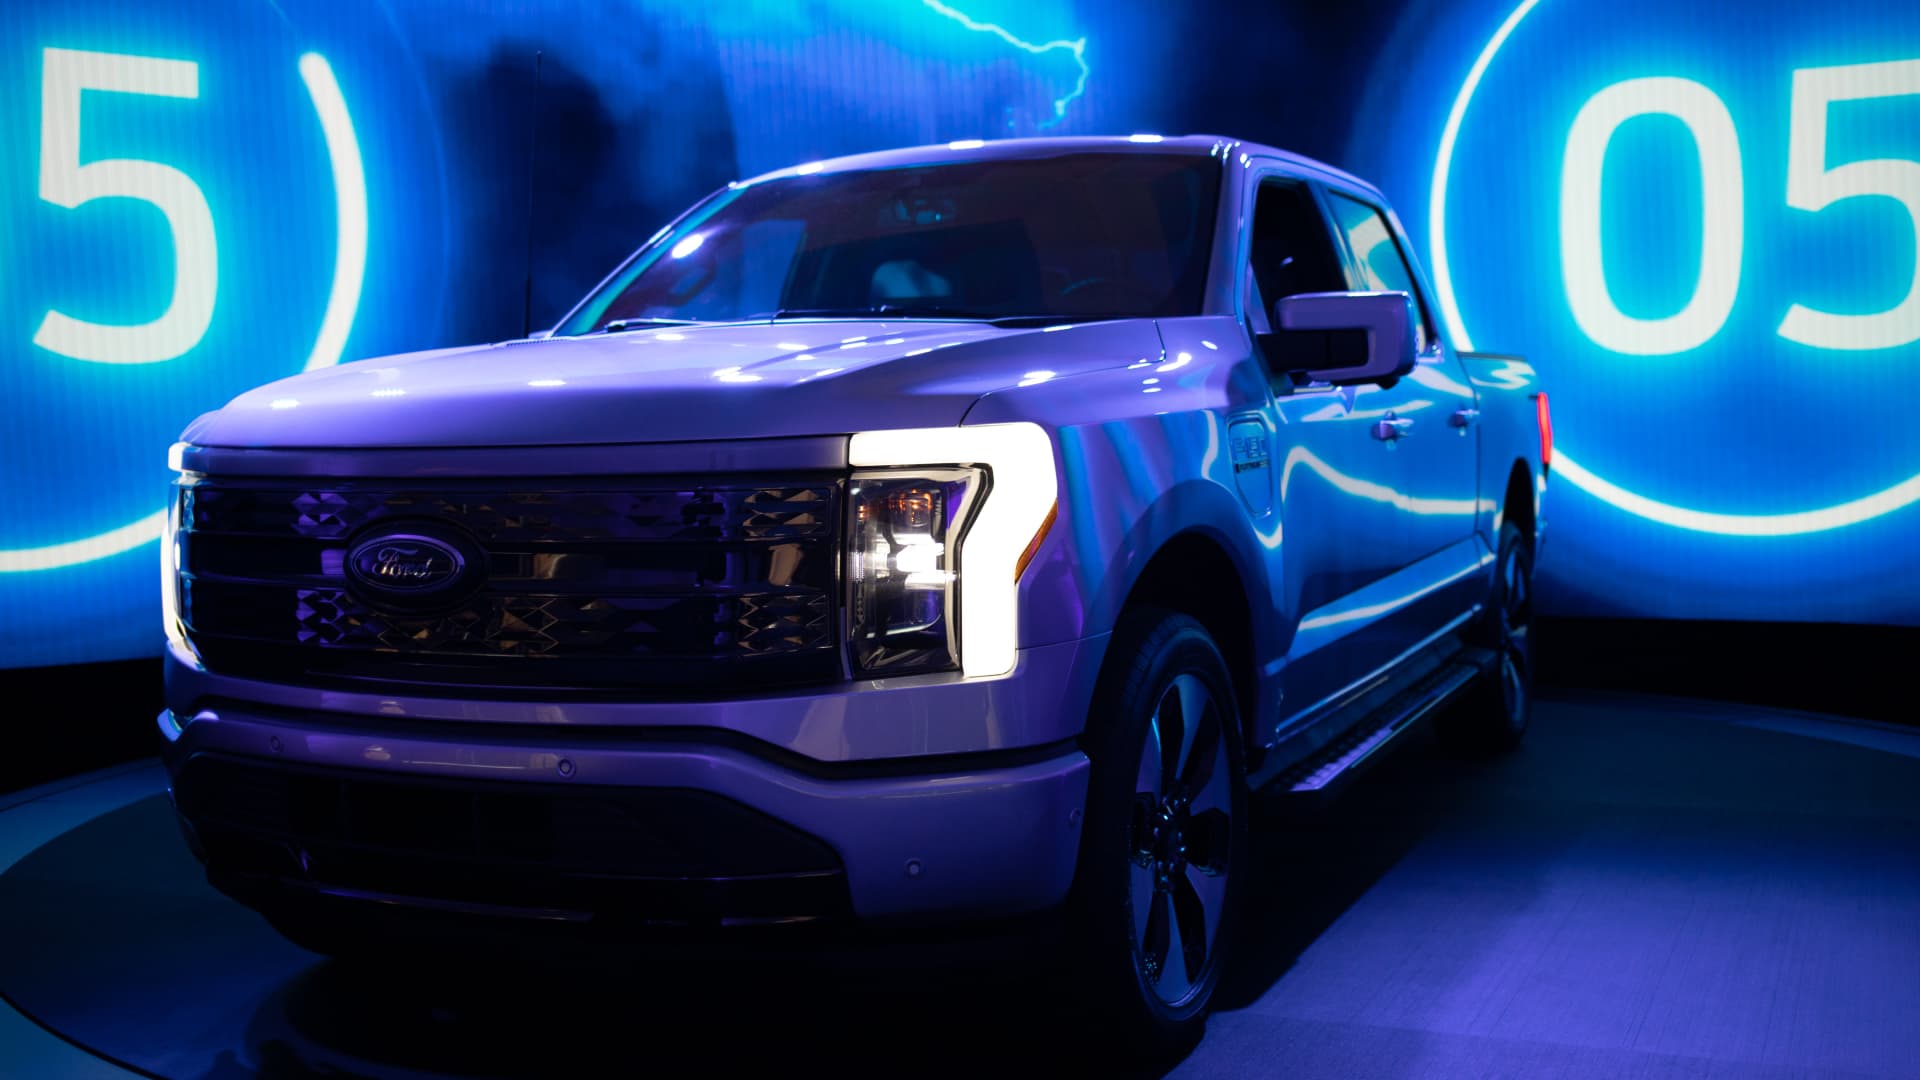 The all-electric Ford F-150 Lightning truck during an augmented reality presentation at the Motor Bella Auto Show in Pontiac, Michigan, on Tuesday, Sept. 21, 2021.